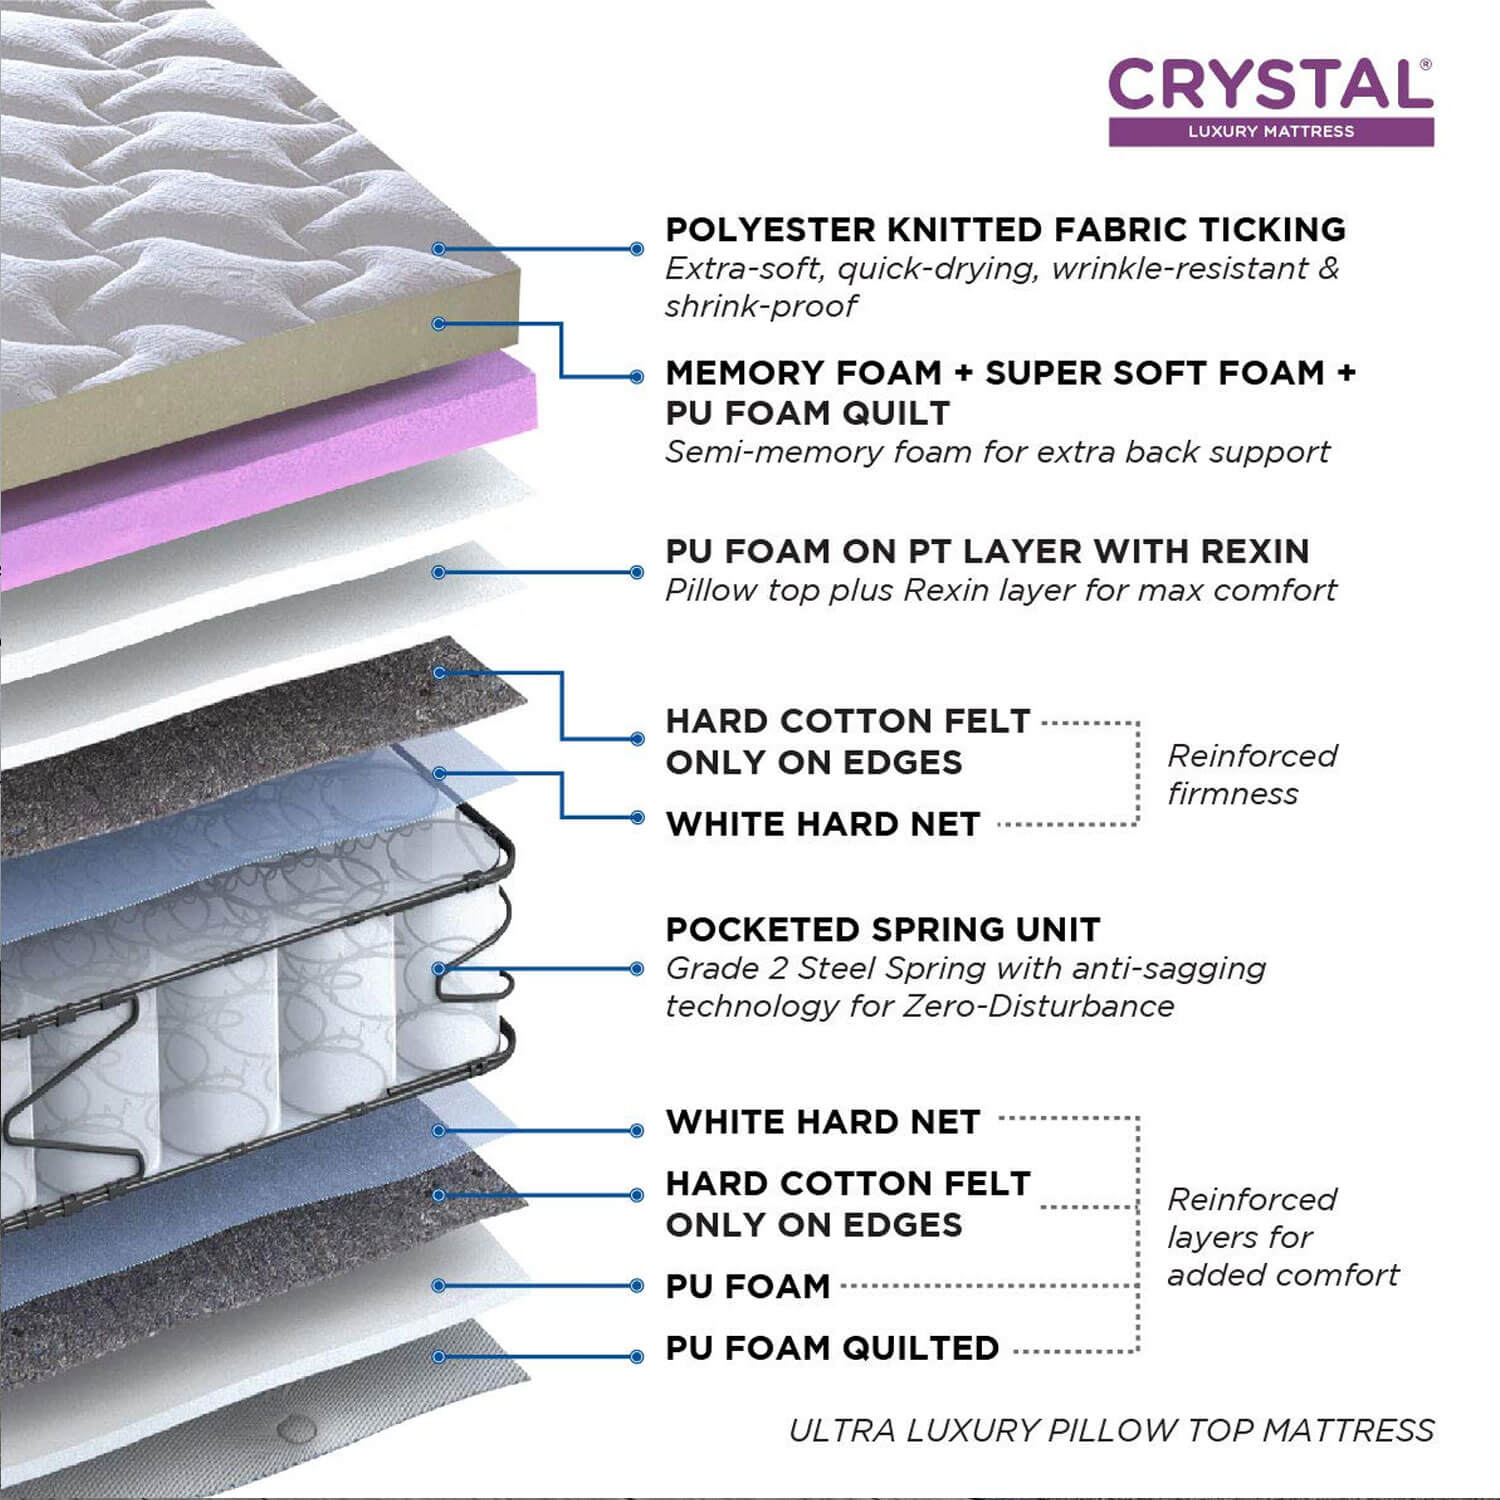 Peps Crystal Pocket Spring with Memory Foam Mattress